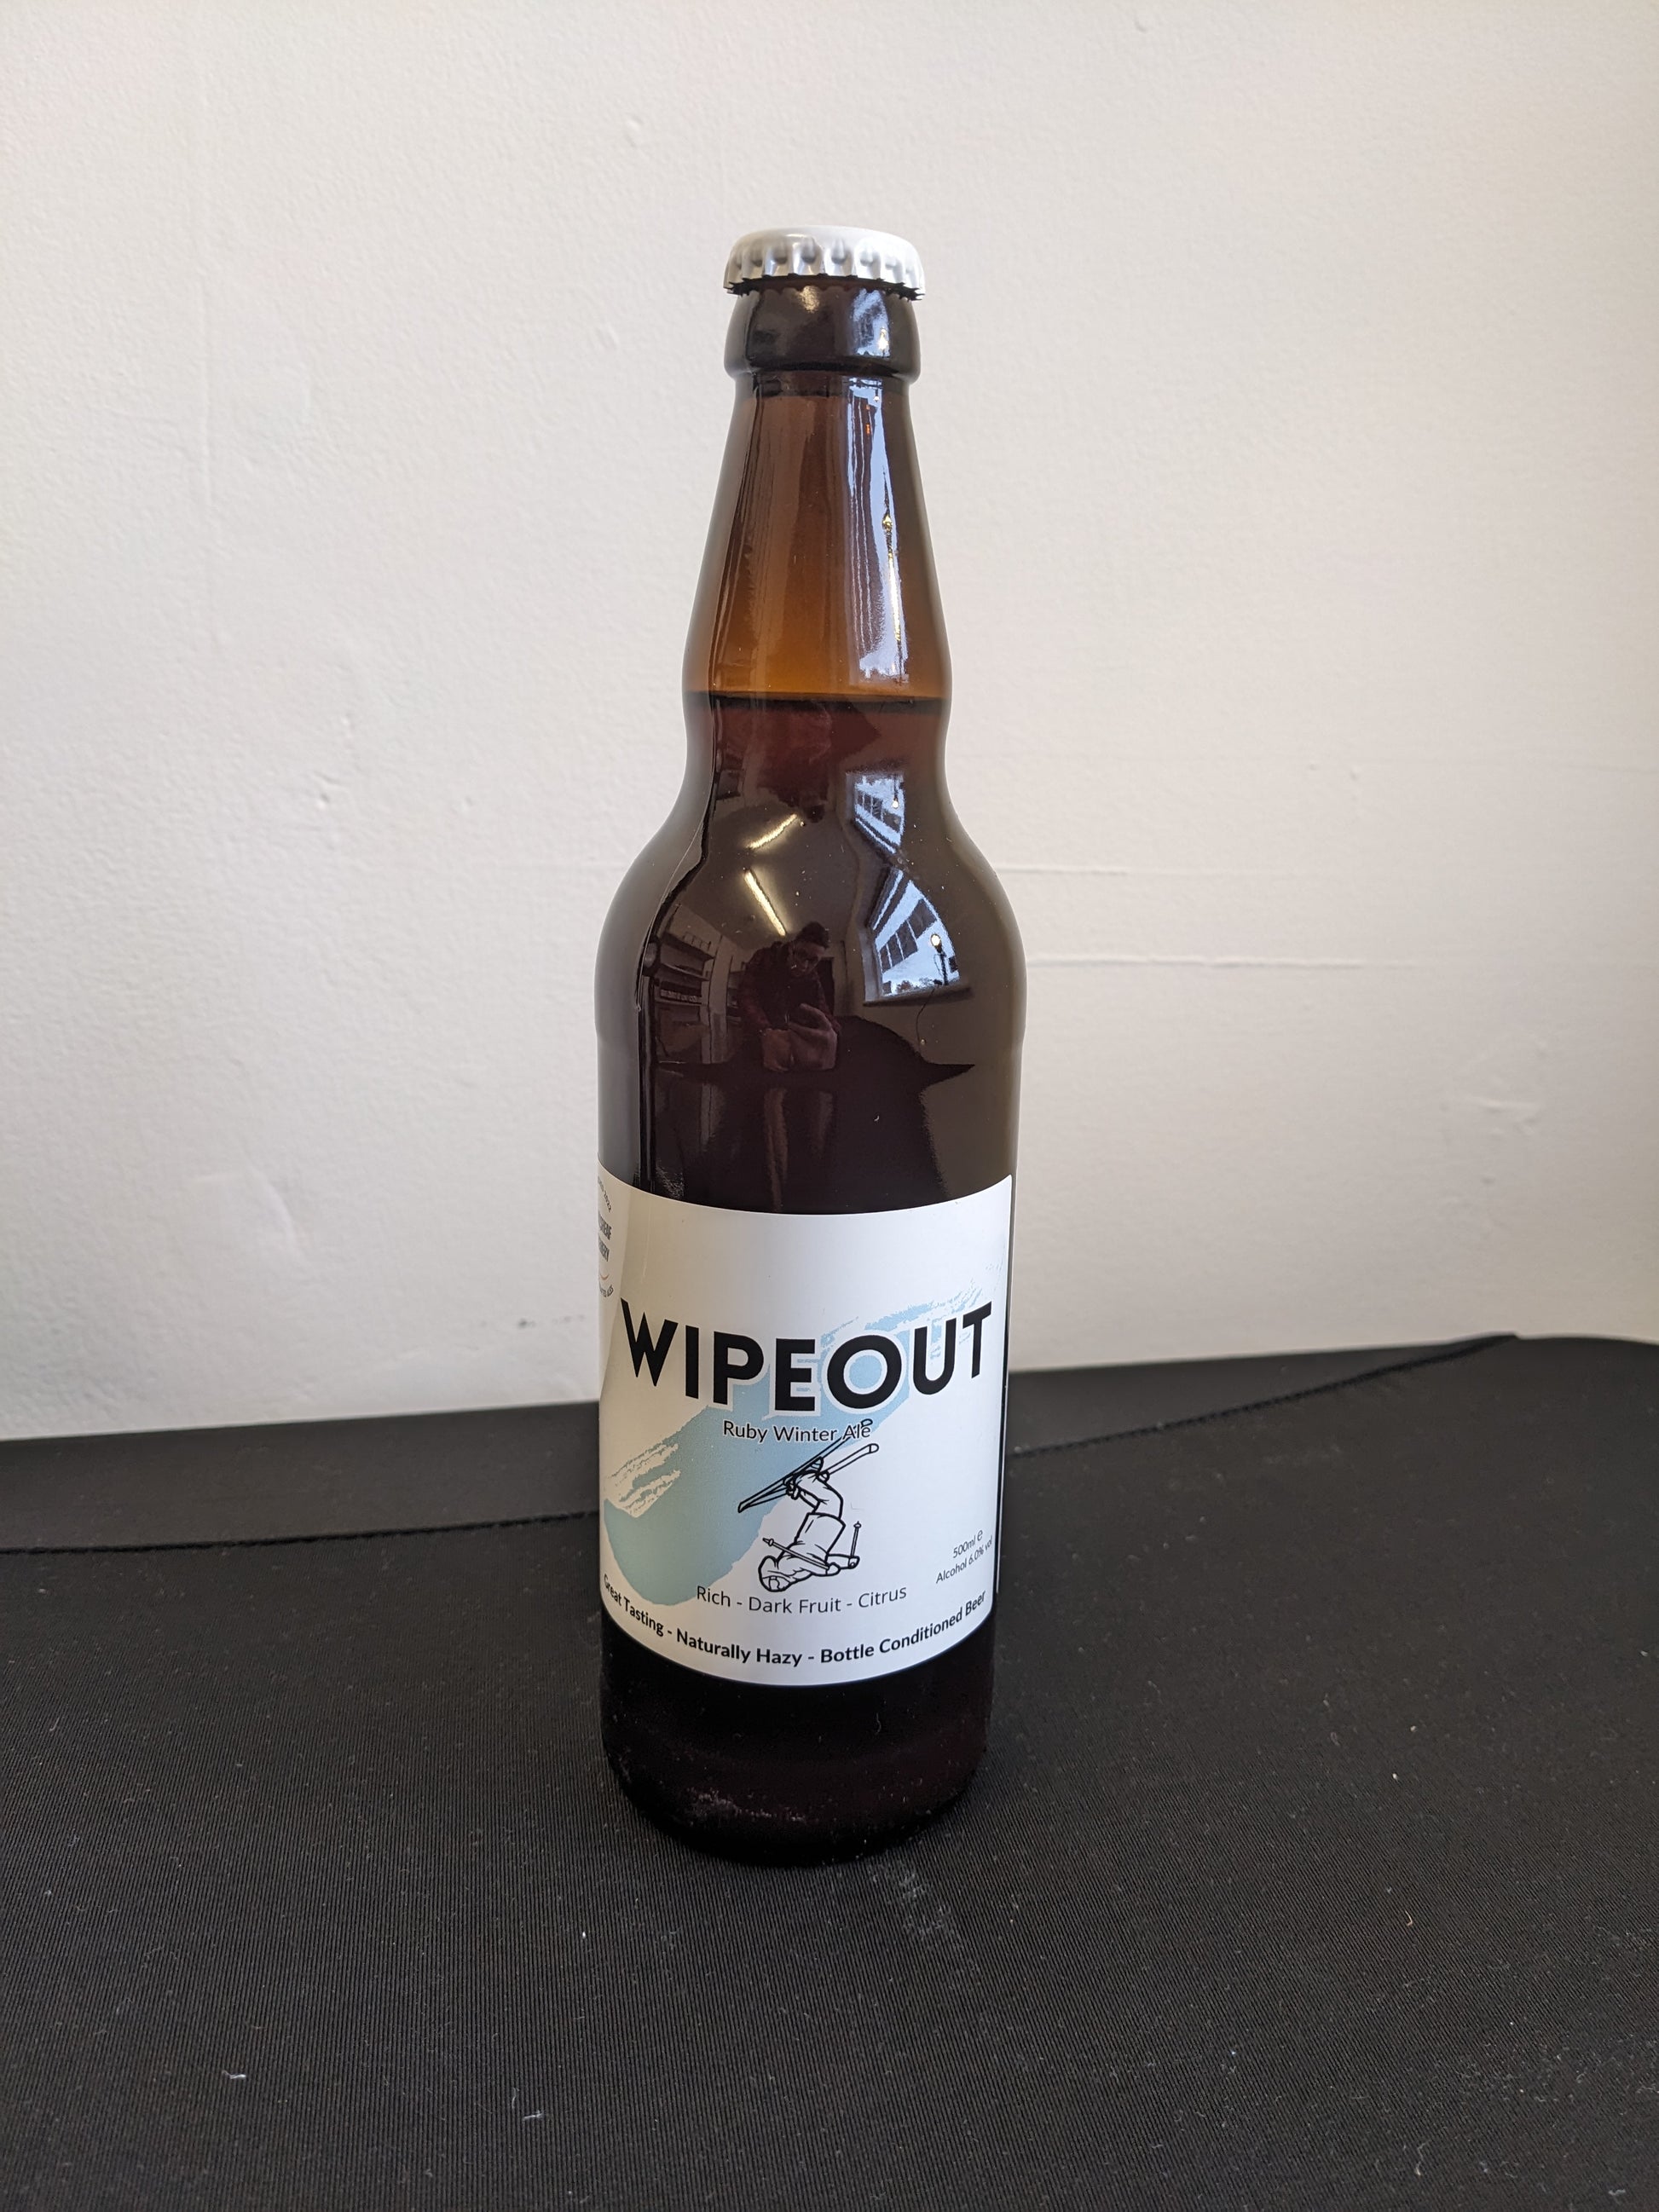 Brown beer bottle with cap. Wipeout Ruby Ale. Great Tasting Naturally Hazy Bottle Conditioned Beer